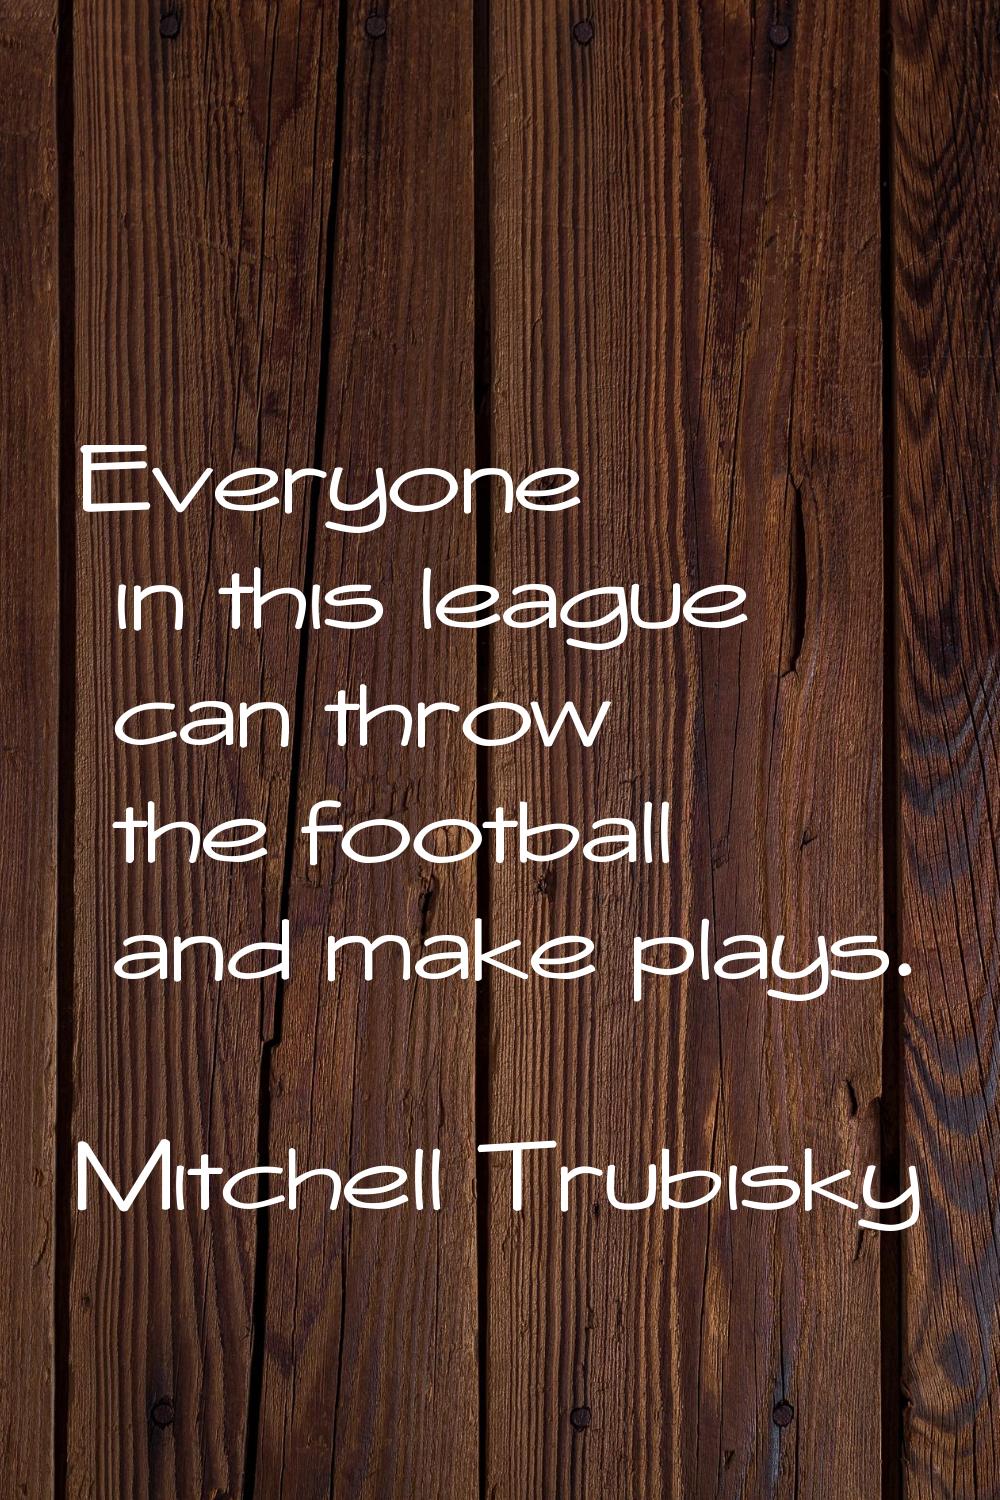 Everyone in this league can throw the football and make plays.